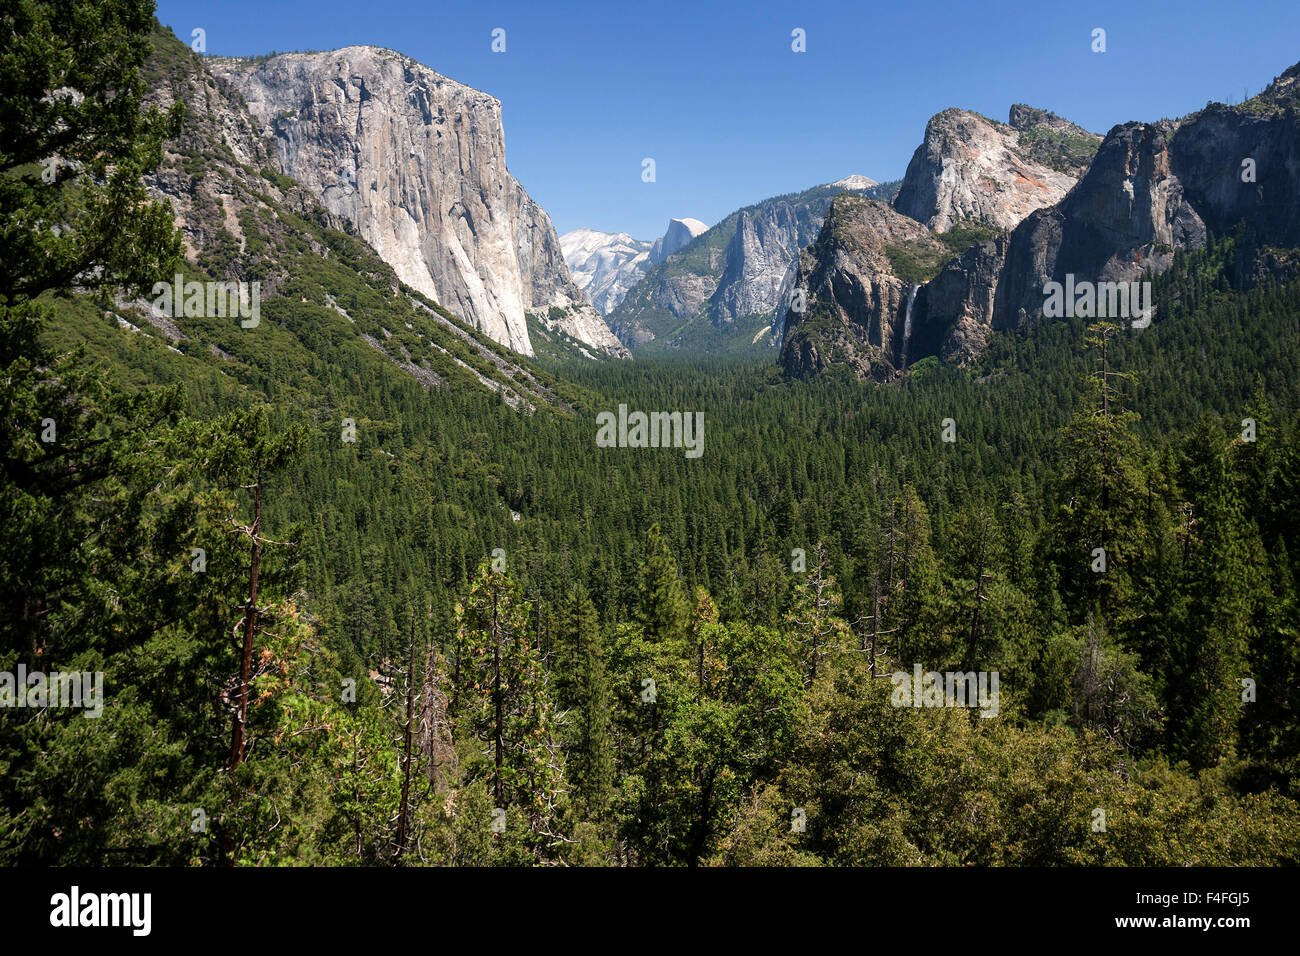 View into Yosemite Valley from Tunnel View, El Capitan left, Yosemite National Park, California, USA Stock Photo